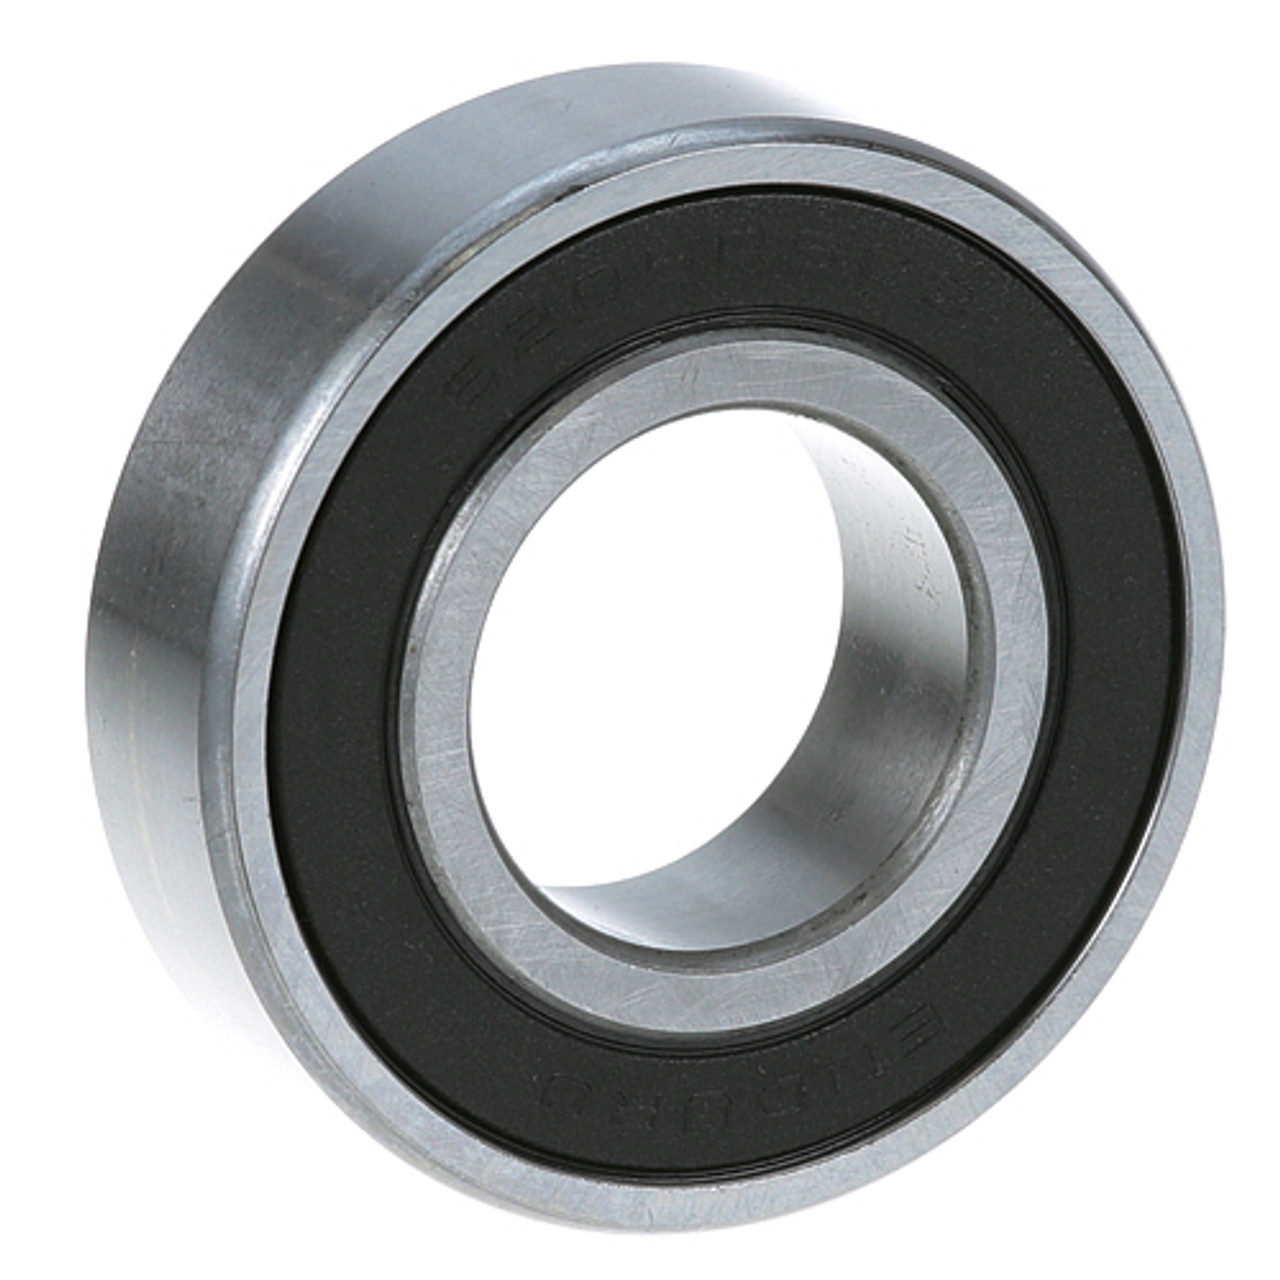 Attachment Drive Bearing - Replacement Part For Hobart 00-BB-7-52